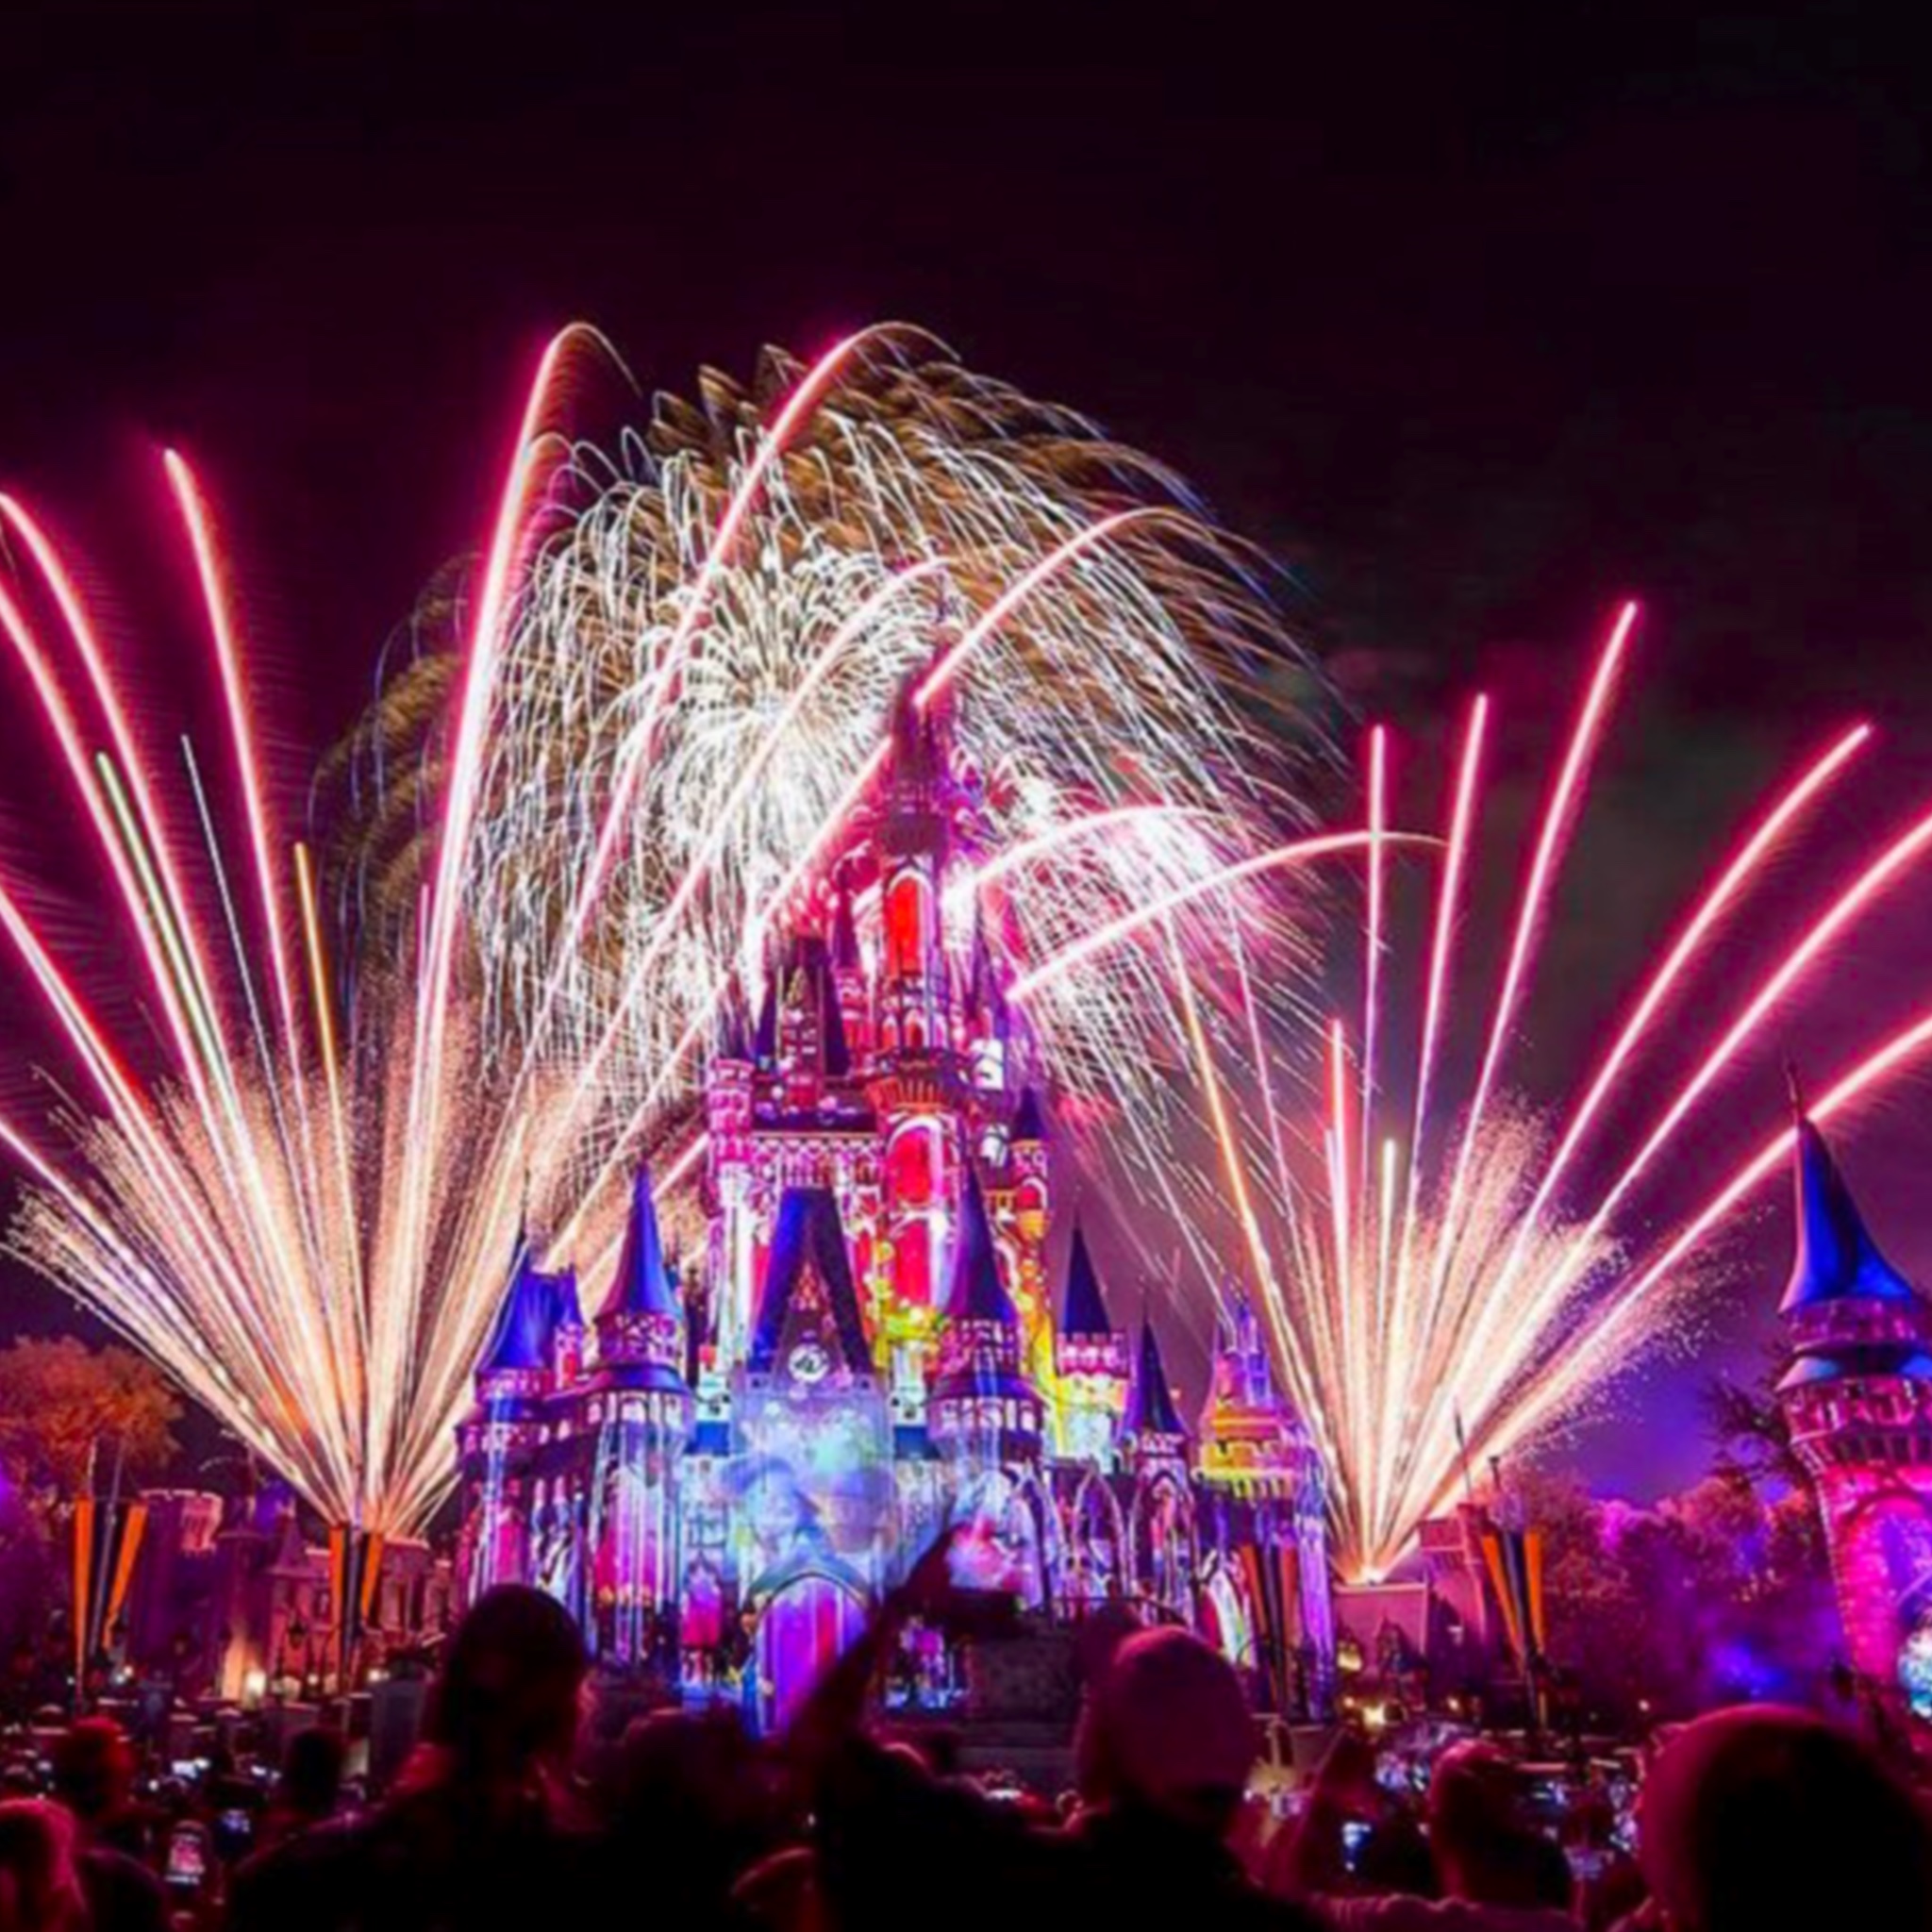 disney vacation packages march 2015